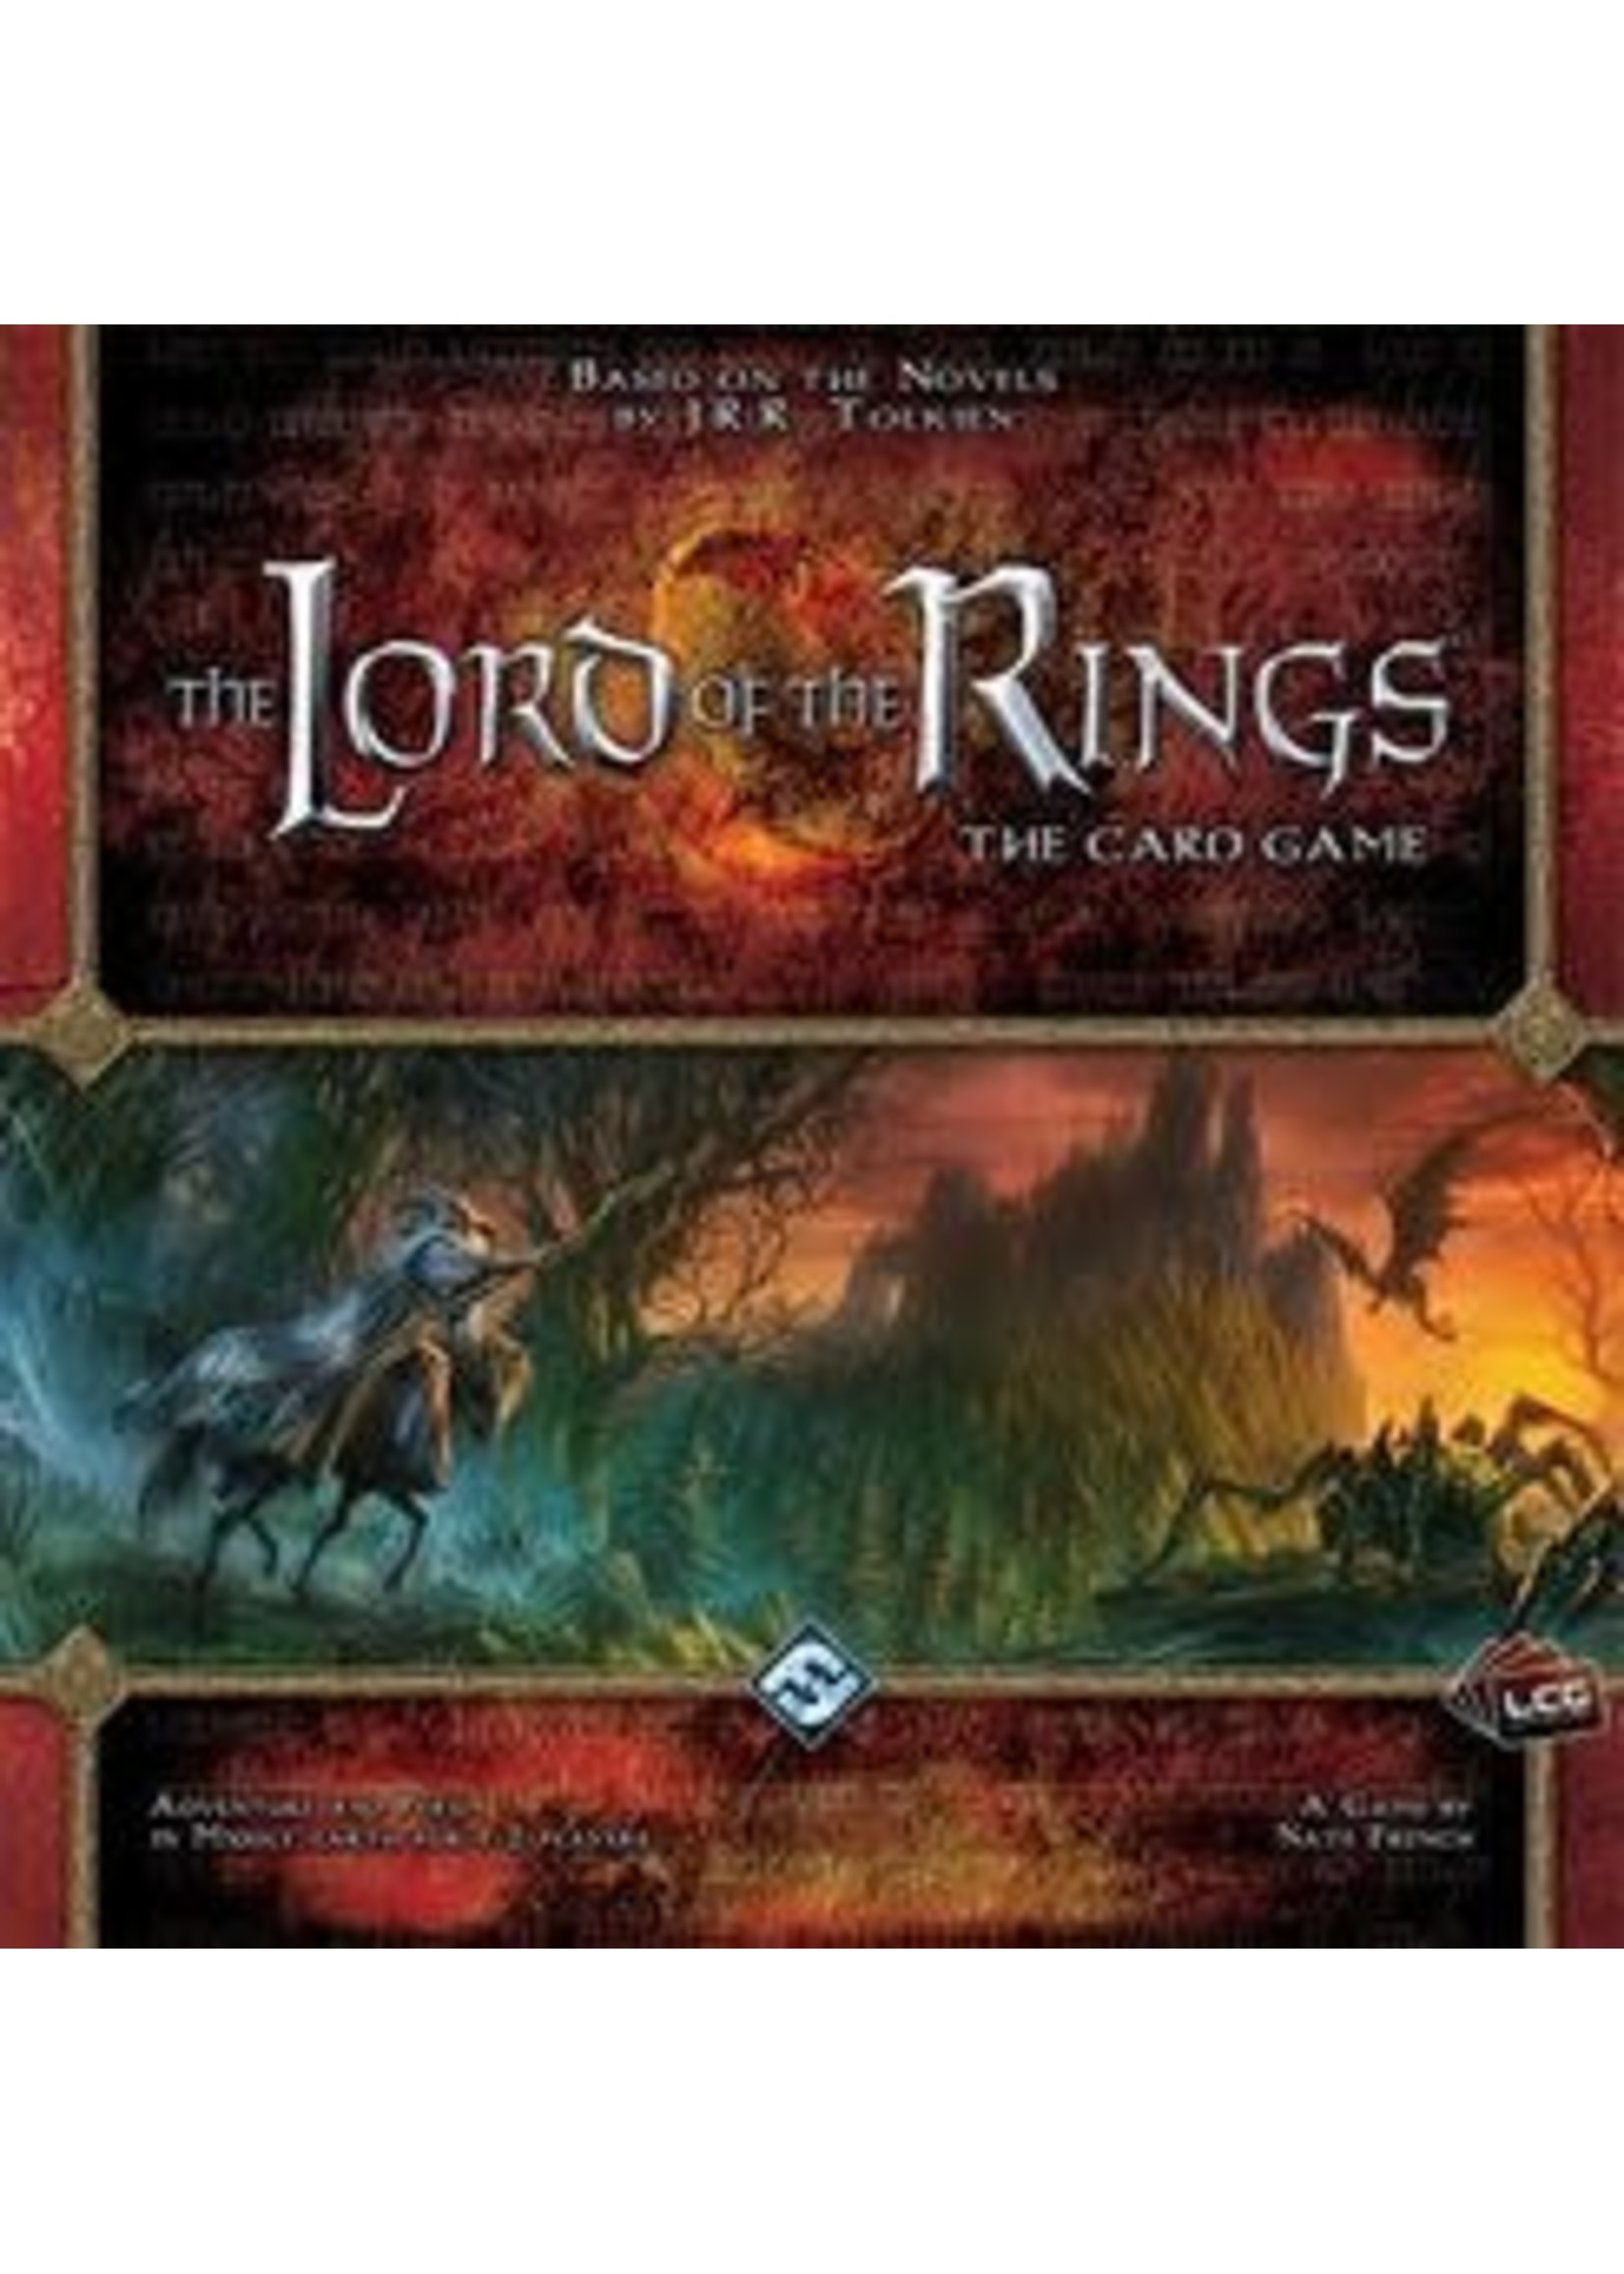 RENTAL - LoTR LCG with expansions 2 lb 4.7 oz